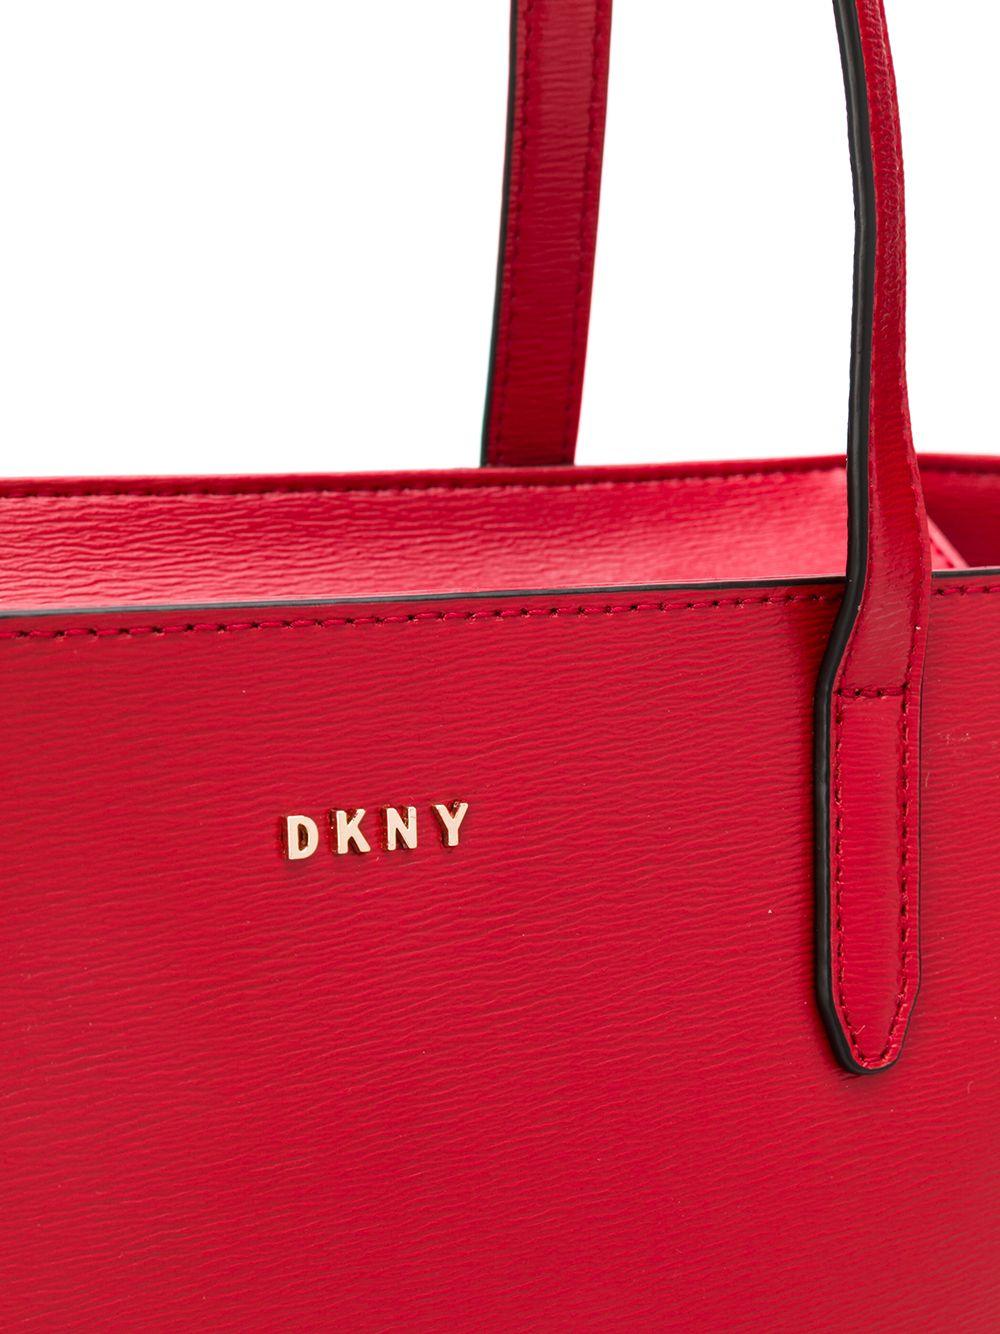 DKNY Bryant Leather Tote Bag in Red - Lyst